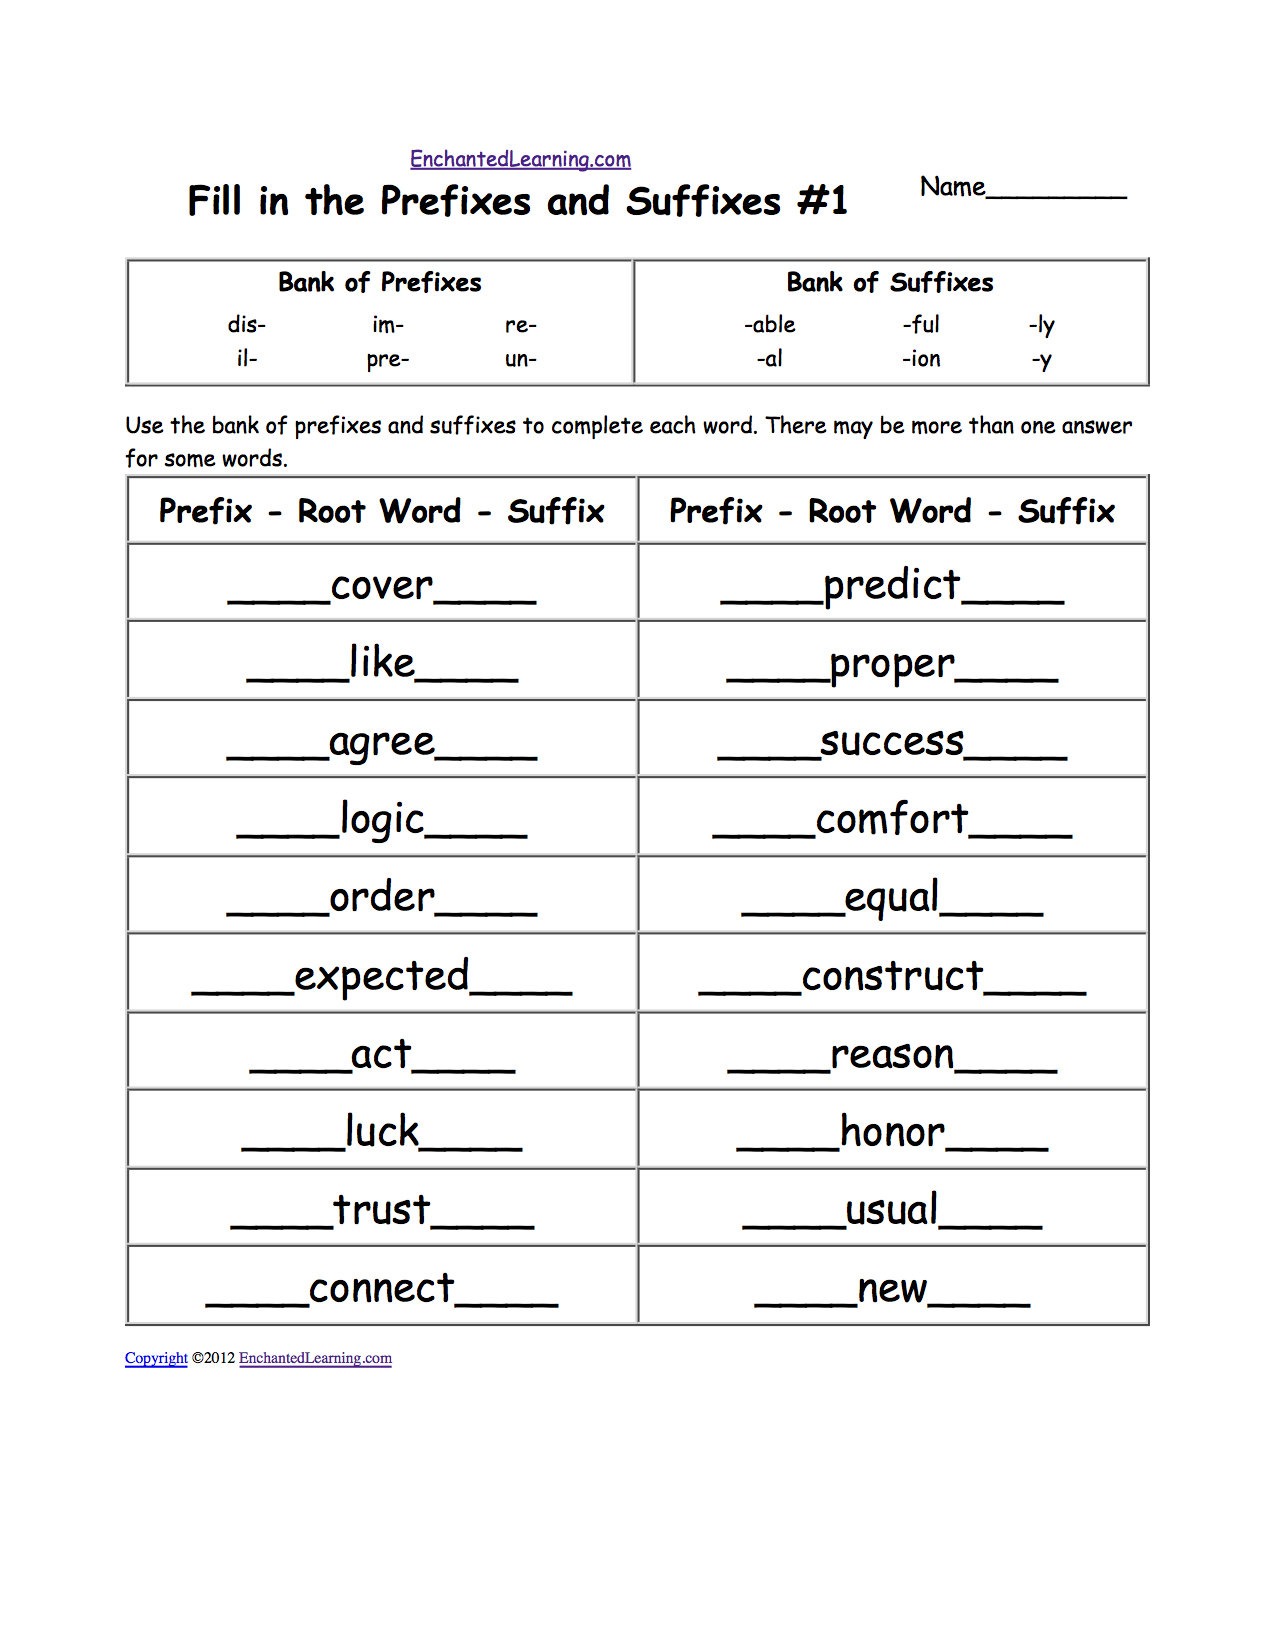 Copy Of Common Prefixess, Suffixes And Rootsxx - Lessons - Blendspace Inside Prefixes And Suffixes Worksheet